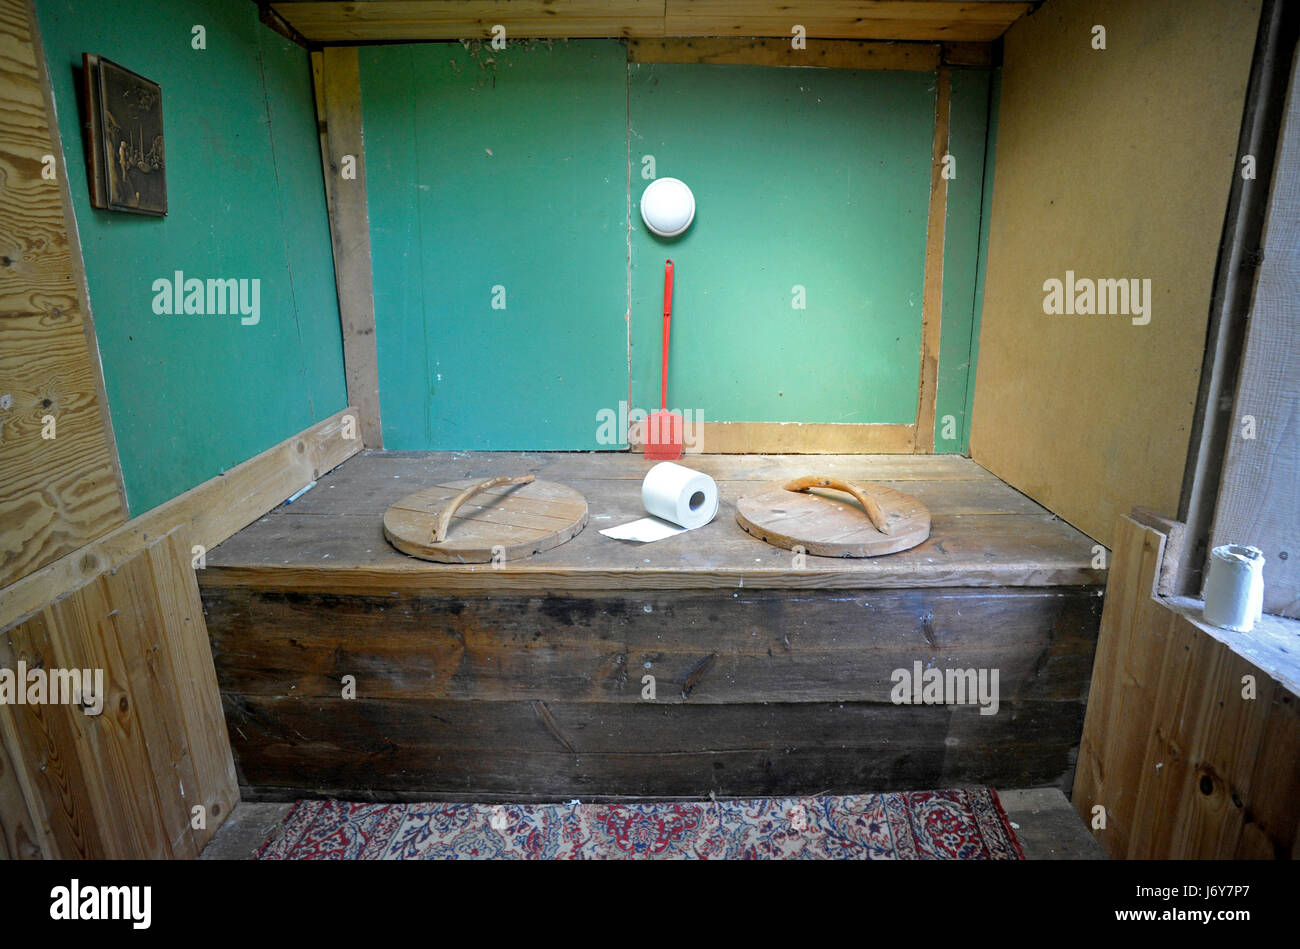 Plumpsklo Lavatory High Resolution Stock Photography and Images - Alamy